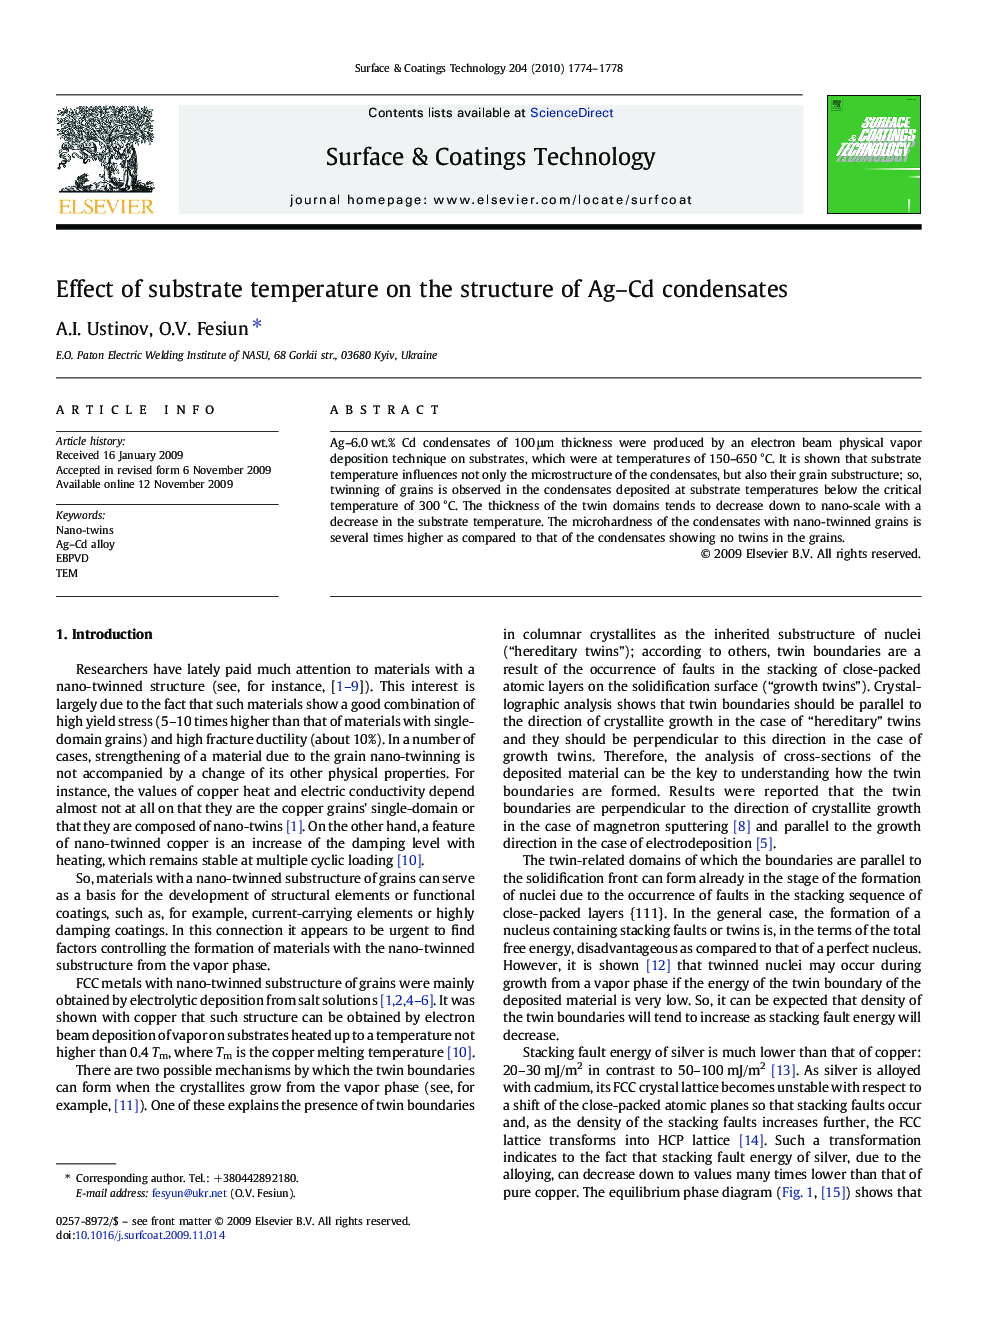 Effect of substrate temperature on the structure of Ag–Cd condensates